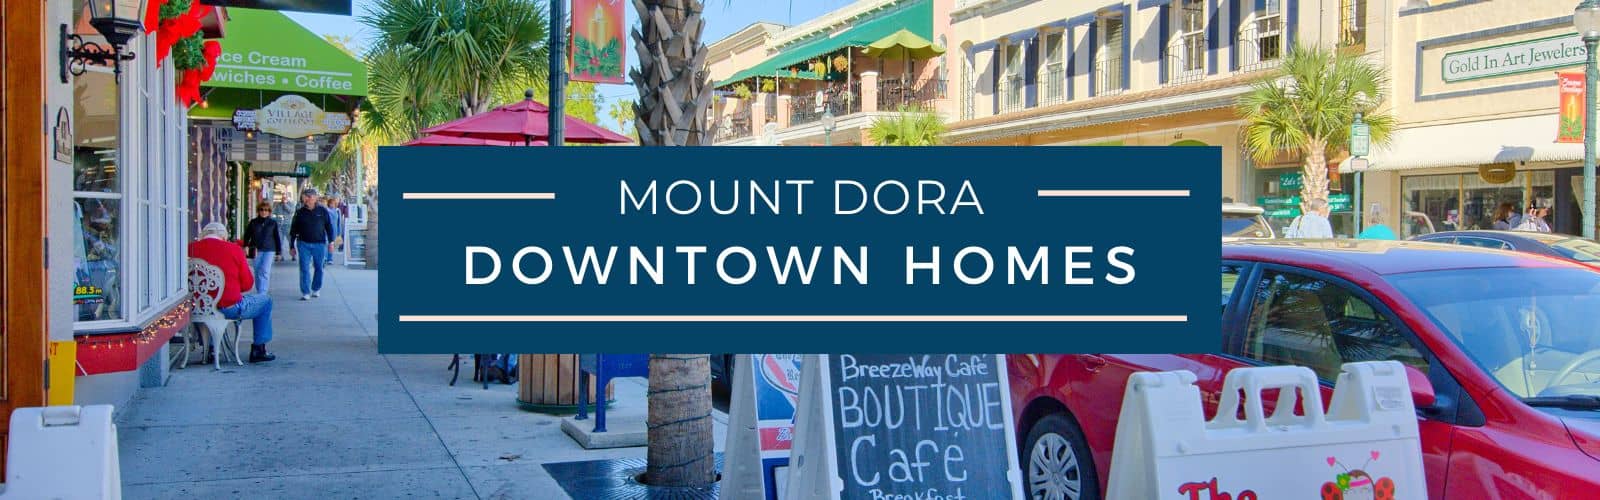 Downtown Mount Dora Homes for Sale